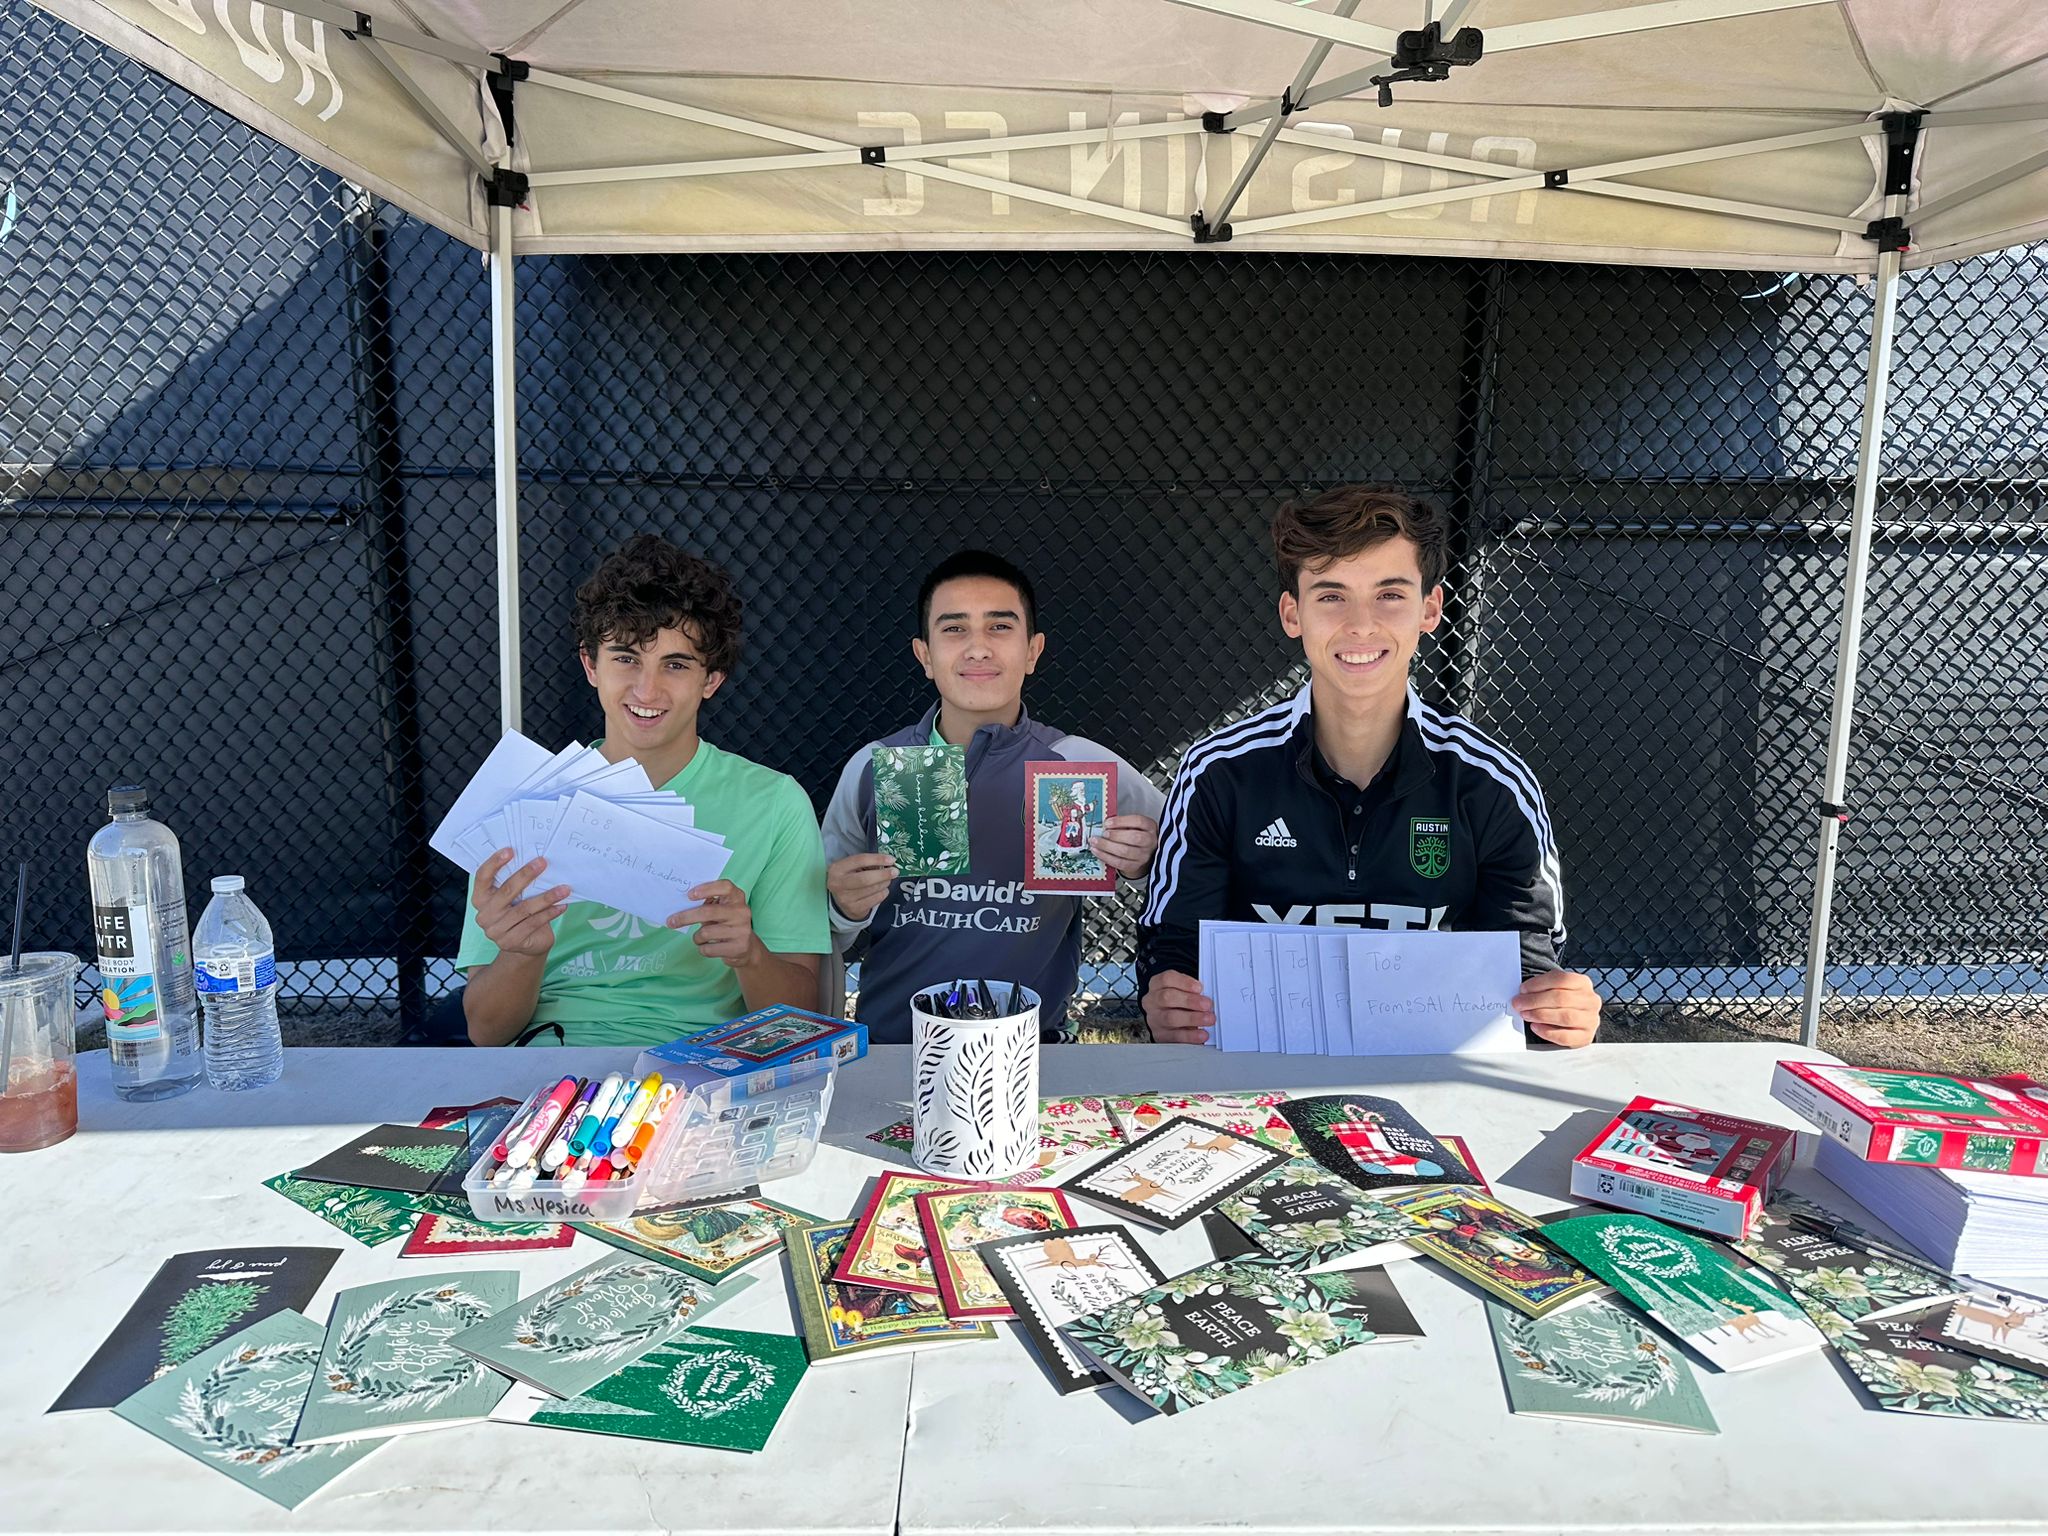 Three young men sit at a table under a canopy on the Austin FC Campus, displaying handmade cards. The table is covered with craft supplies, water bottles, and more cards. A black chain-link fence is visible in the background.